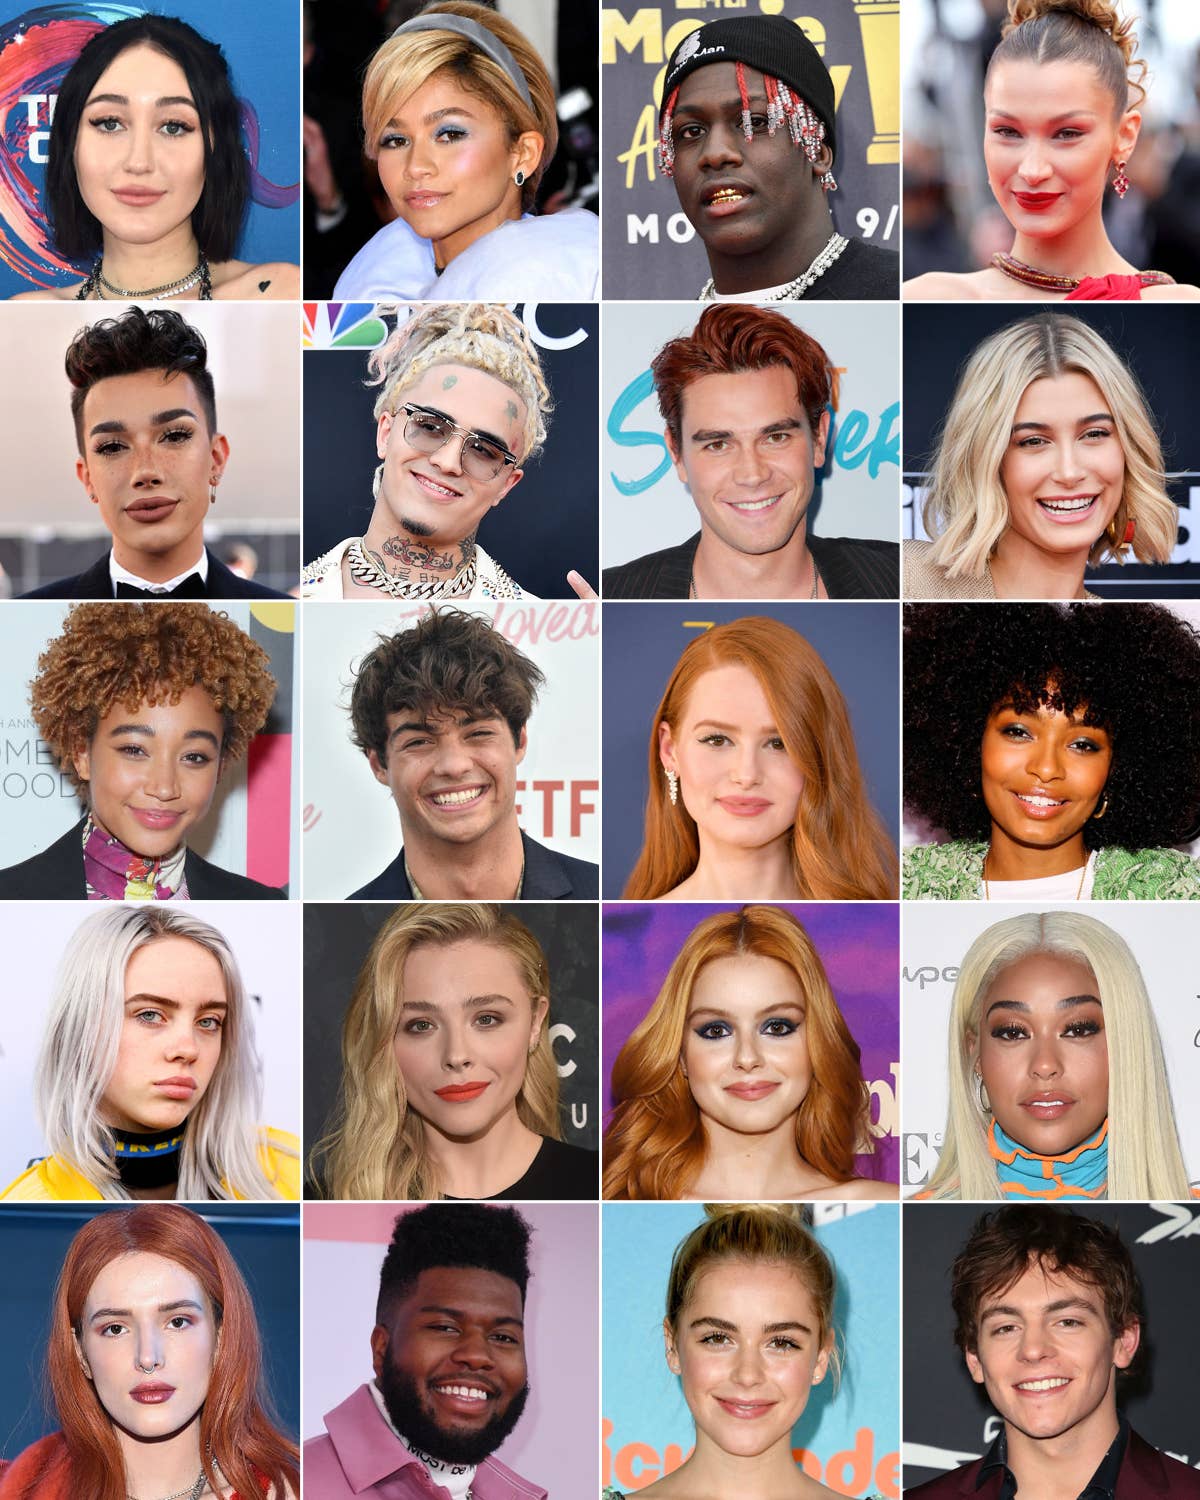 Who is the most famous Gen Z?